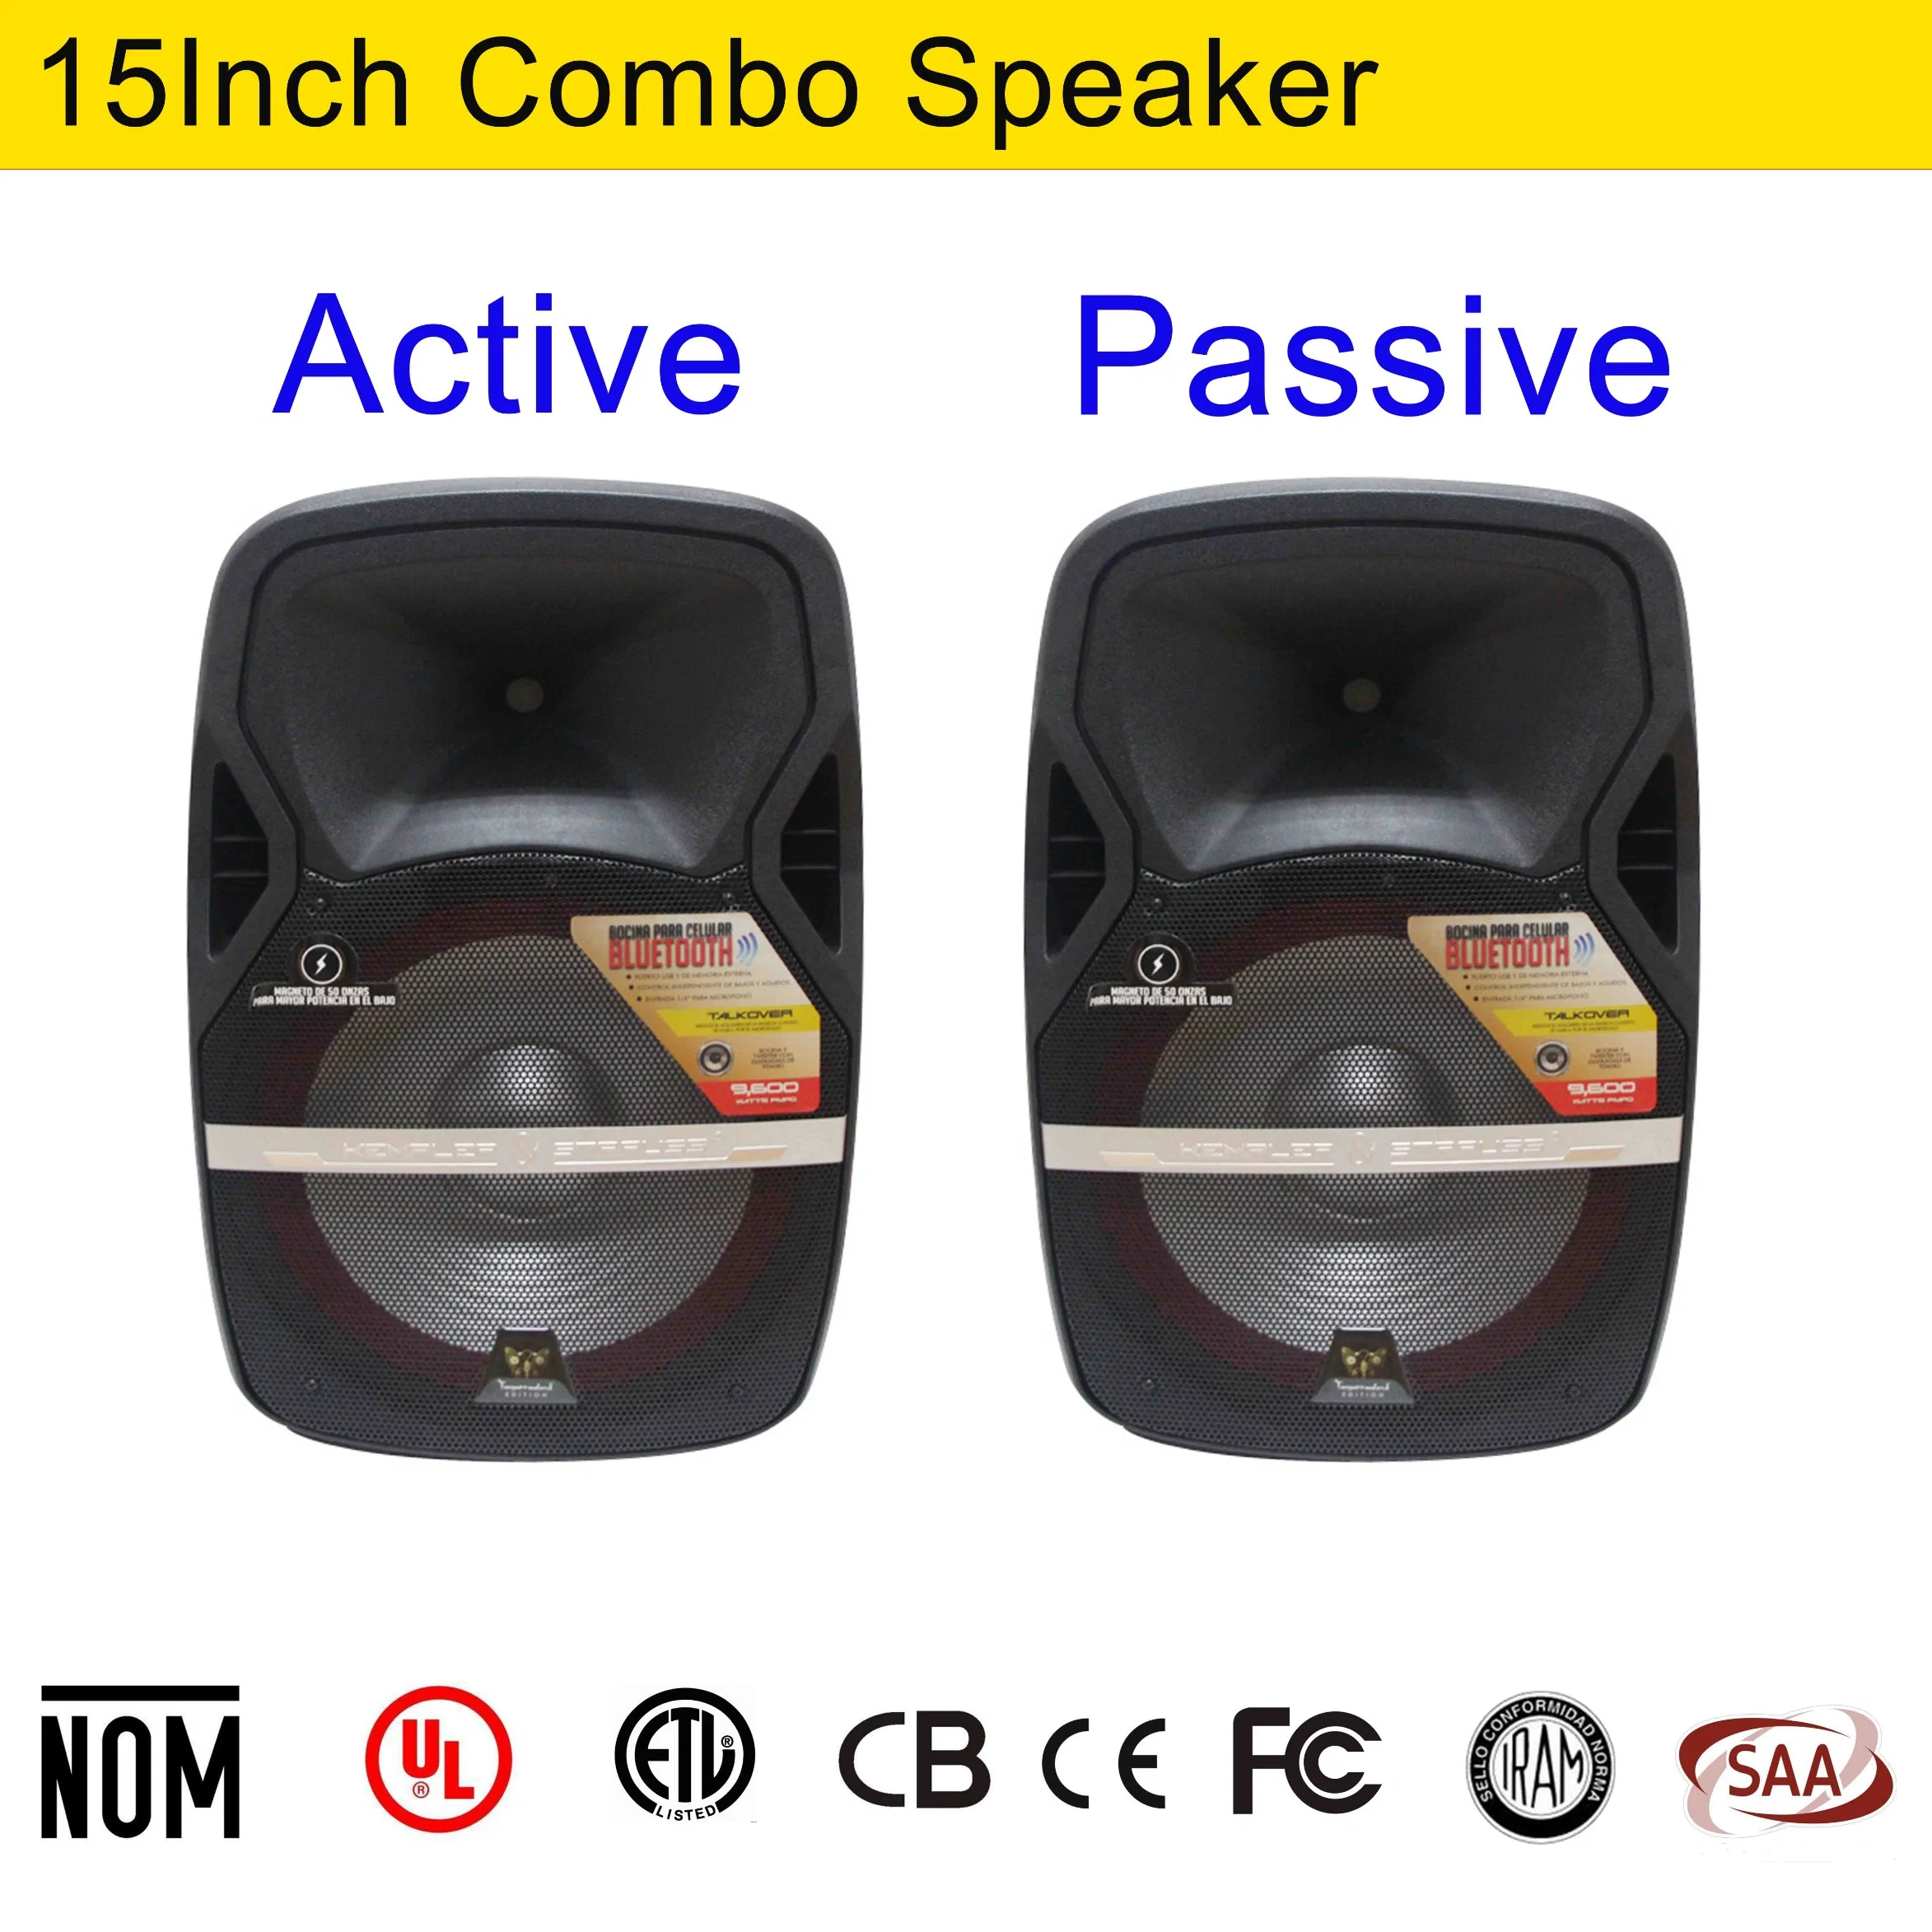 15inch Combo Passive Speaker System with LED Display